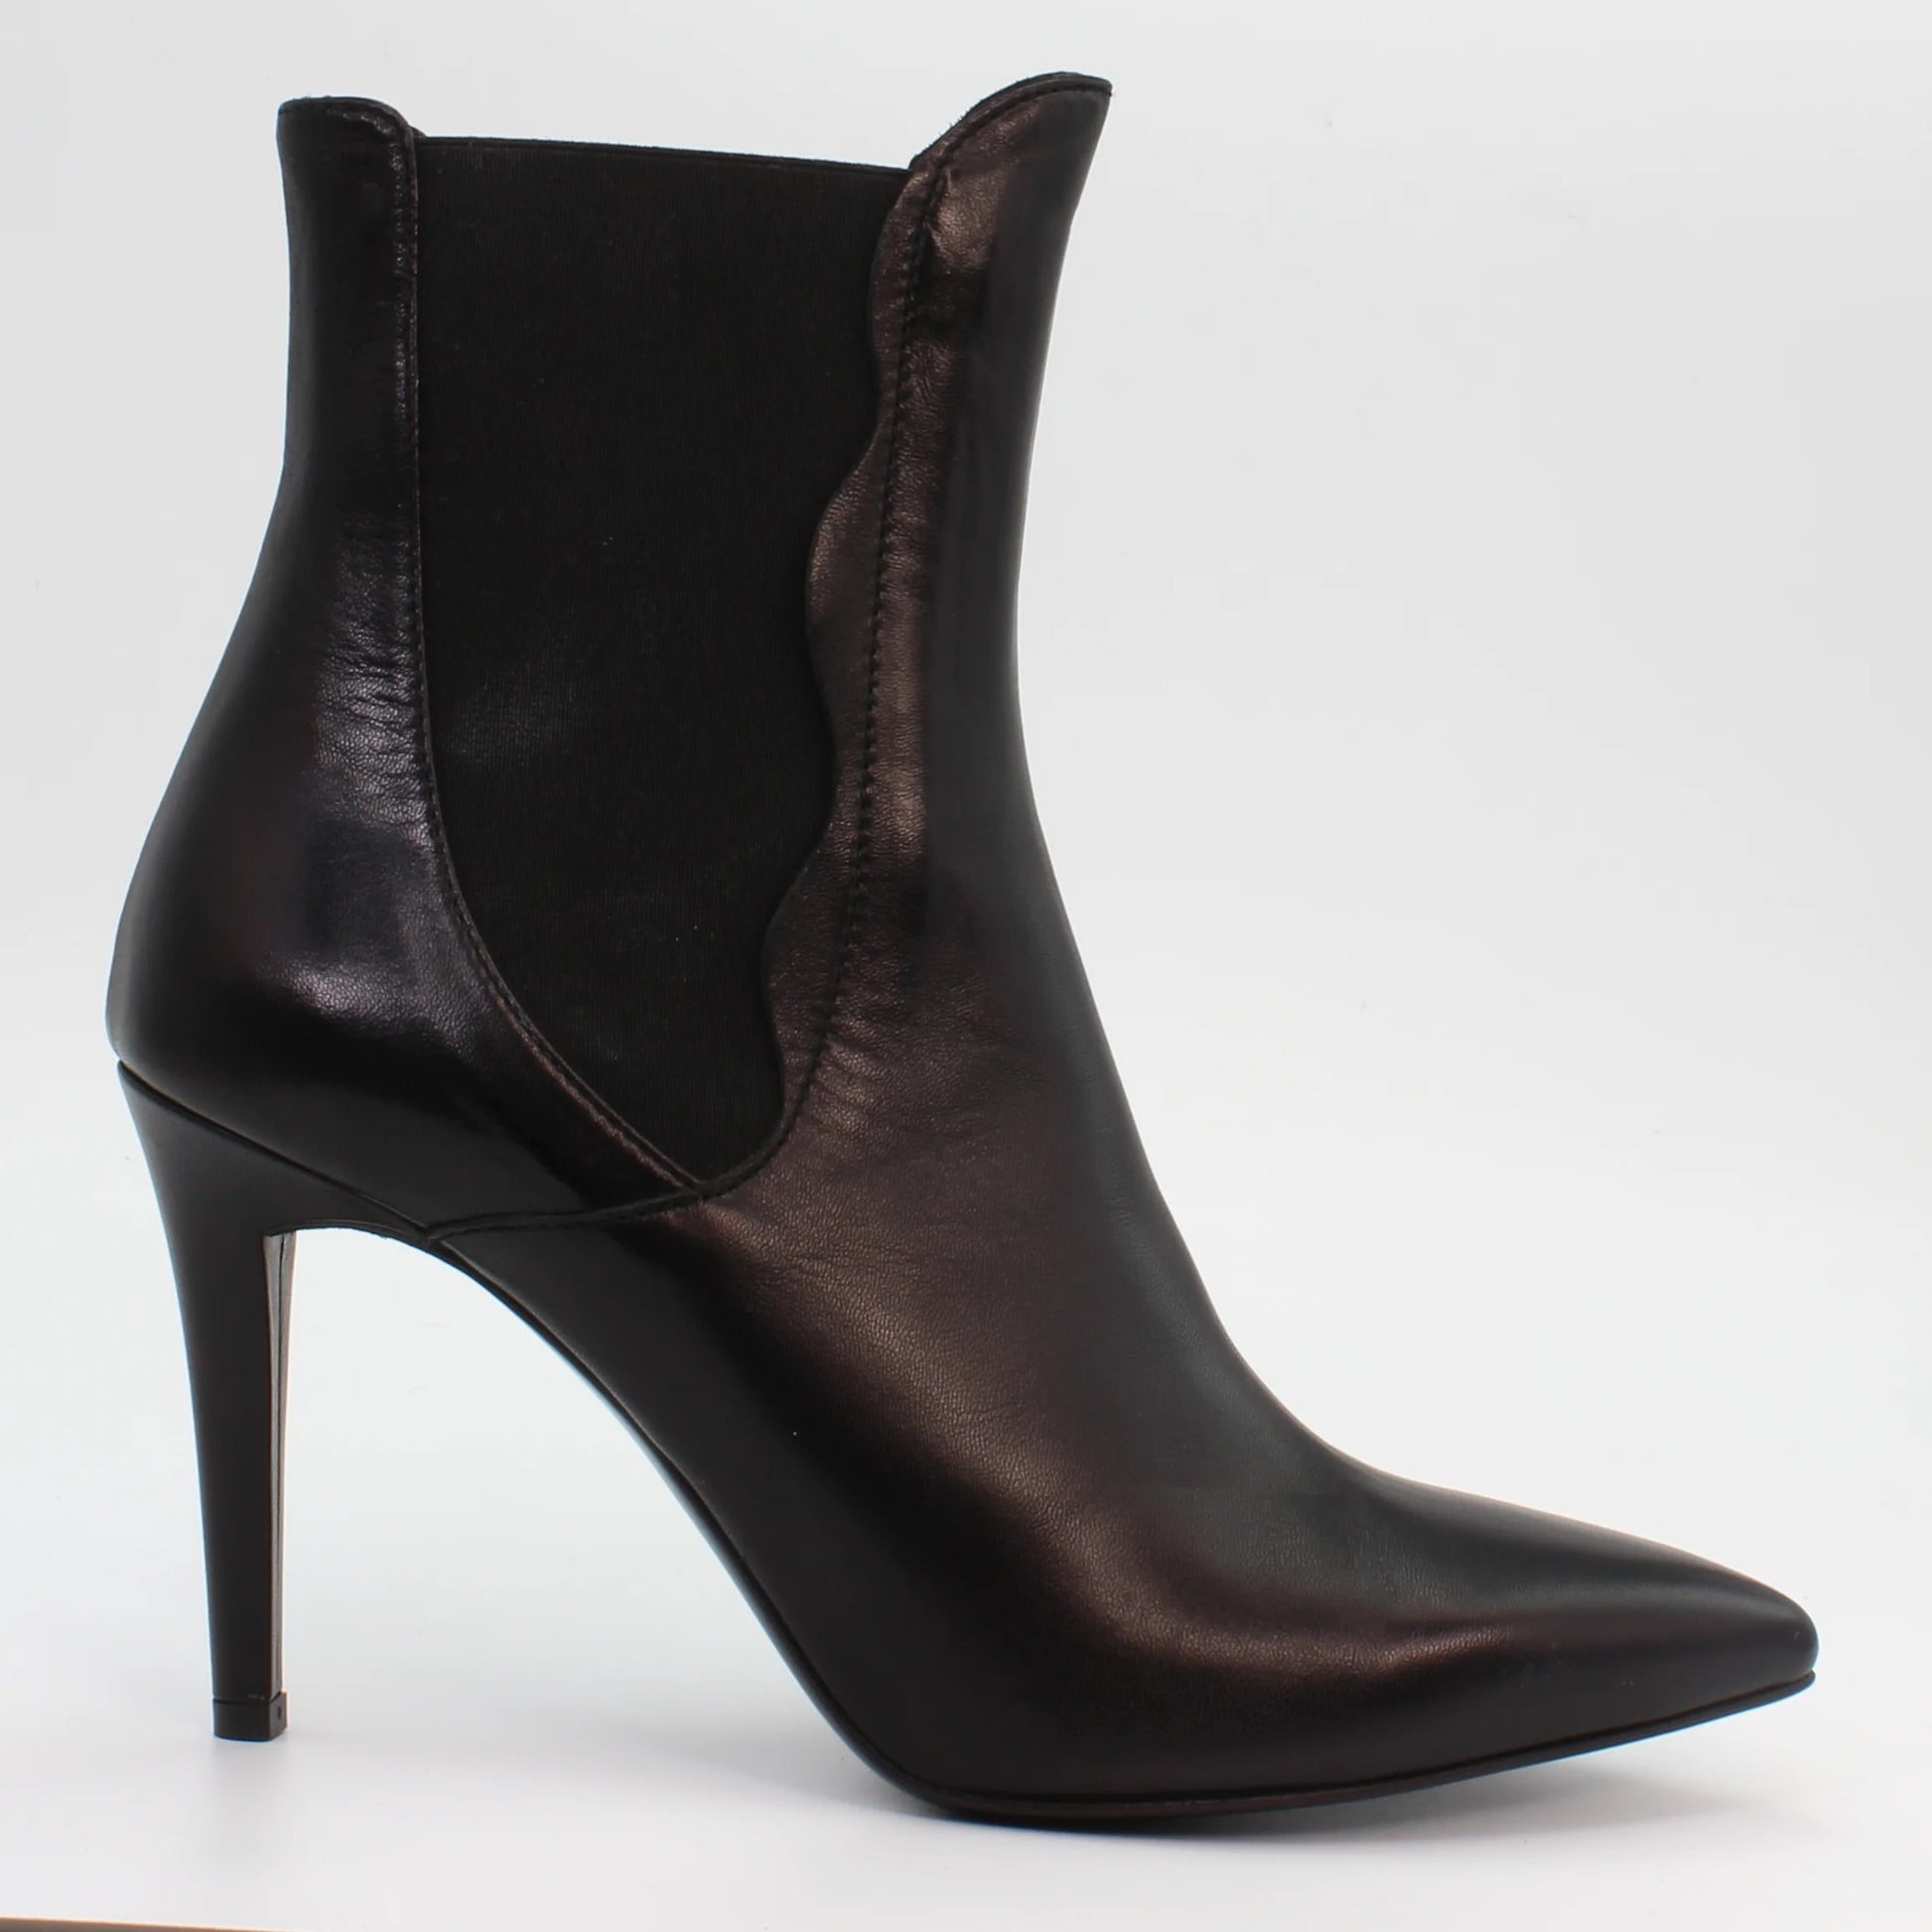 Shop Ladies Italian Stiletto Ankle Boot in Black (AL57525) or browse our range of hand-made Italian ankle boots in leather or suede in-store at Aliverti Durban or Cape Town, or shop online. We deliver in South Africa & offer multiple payment plans as well as accept multiple safe & secure payment methods.